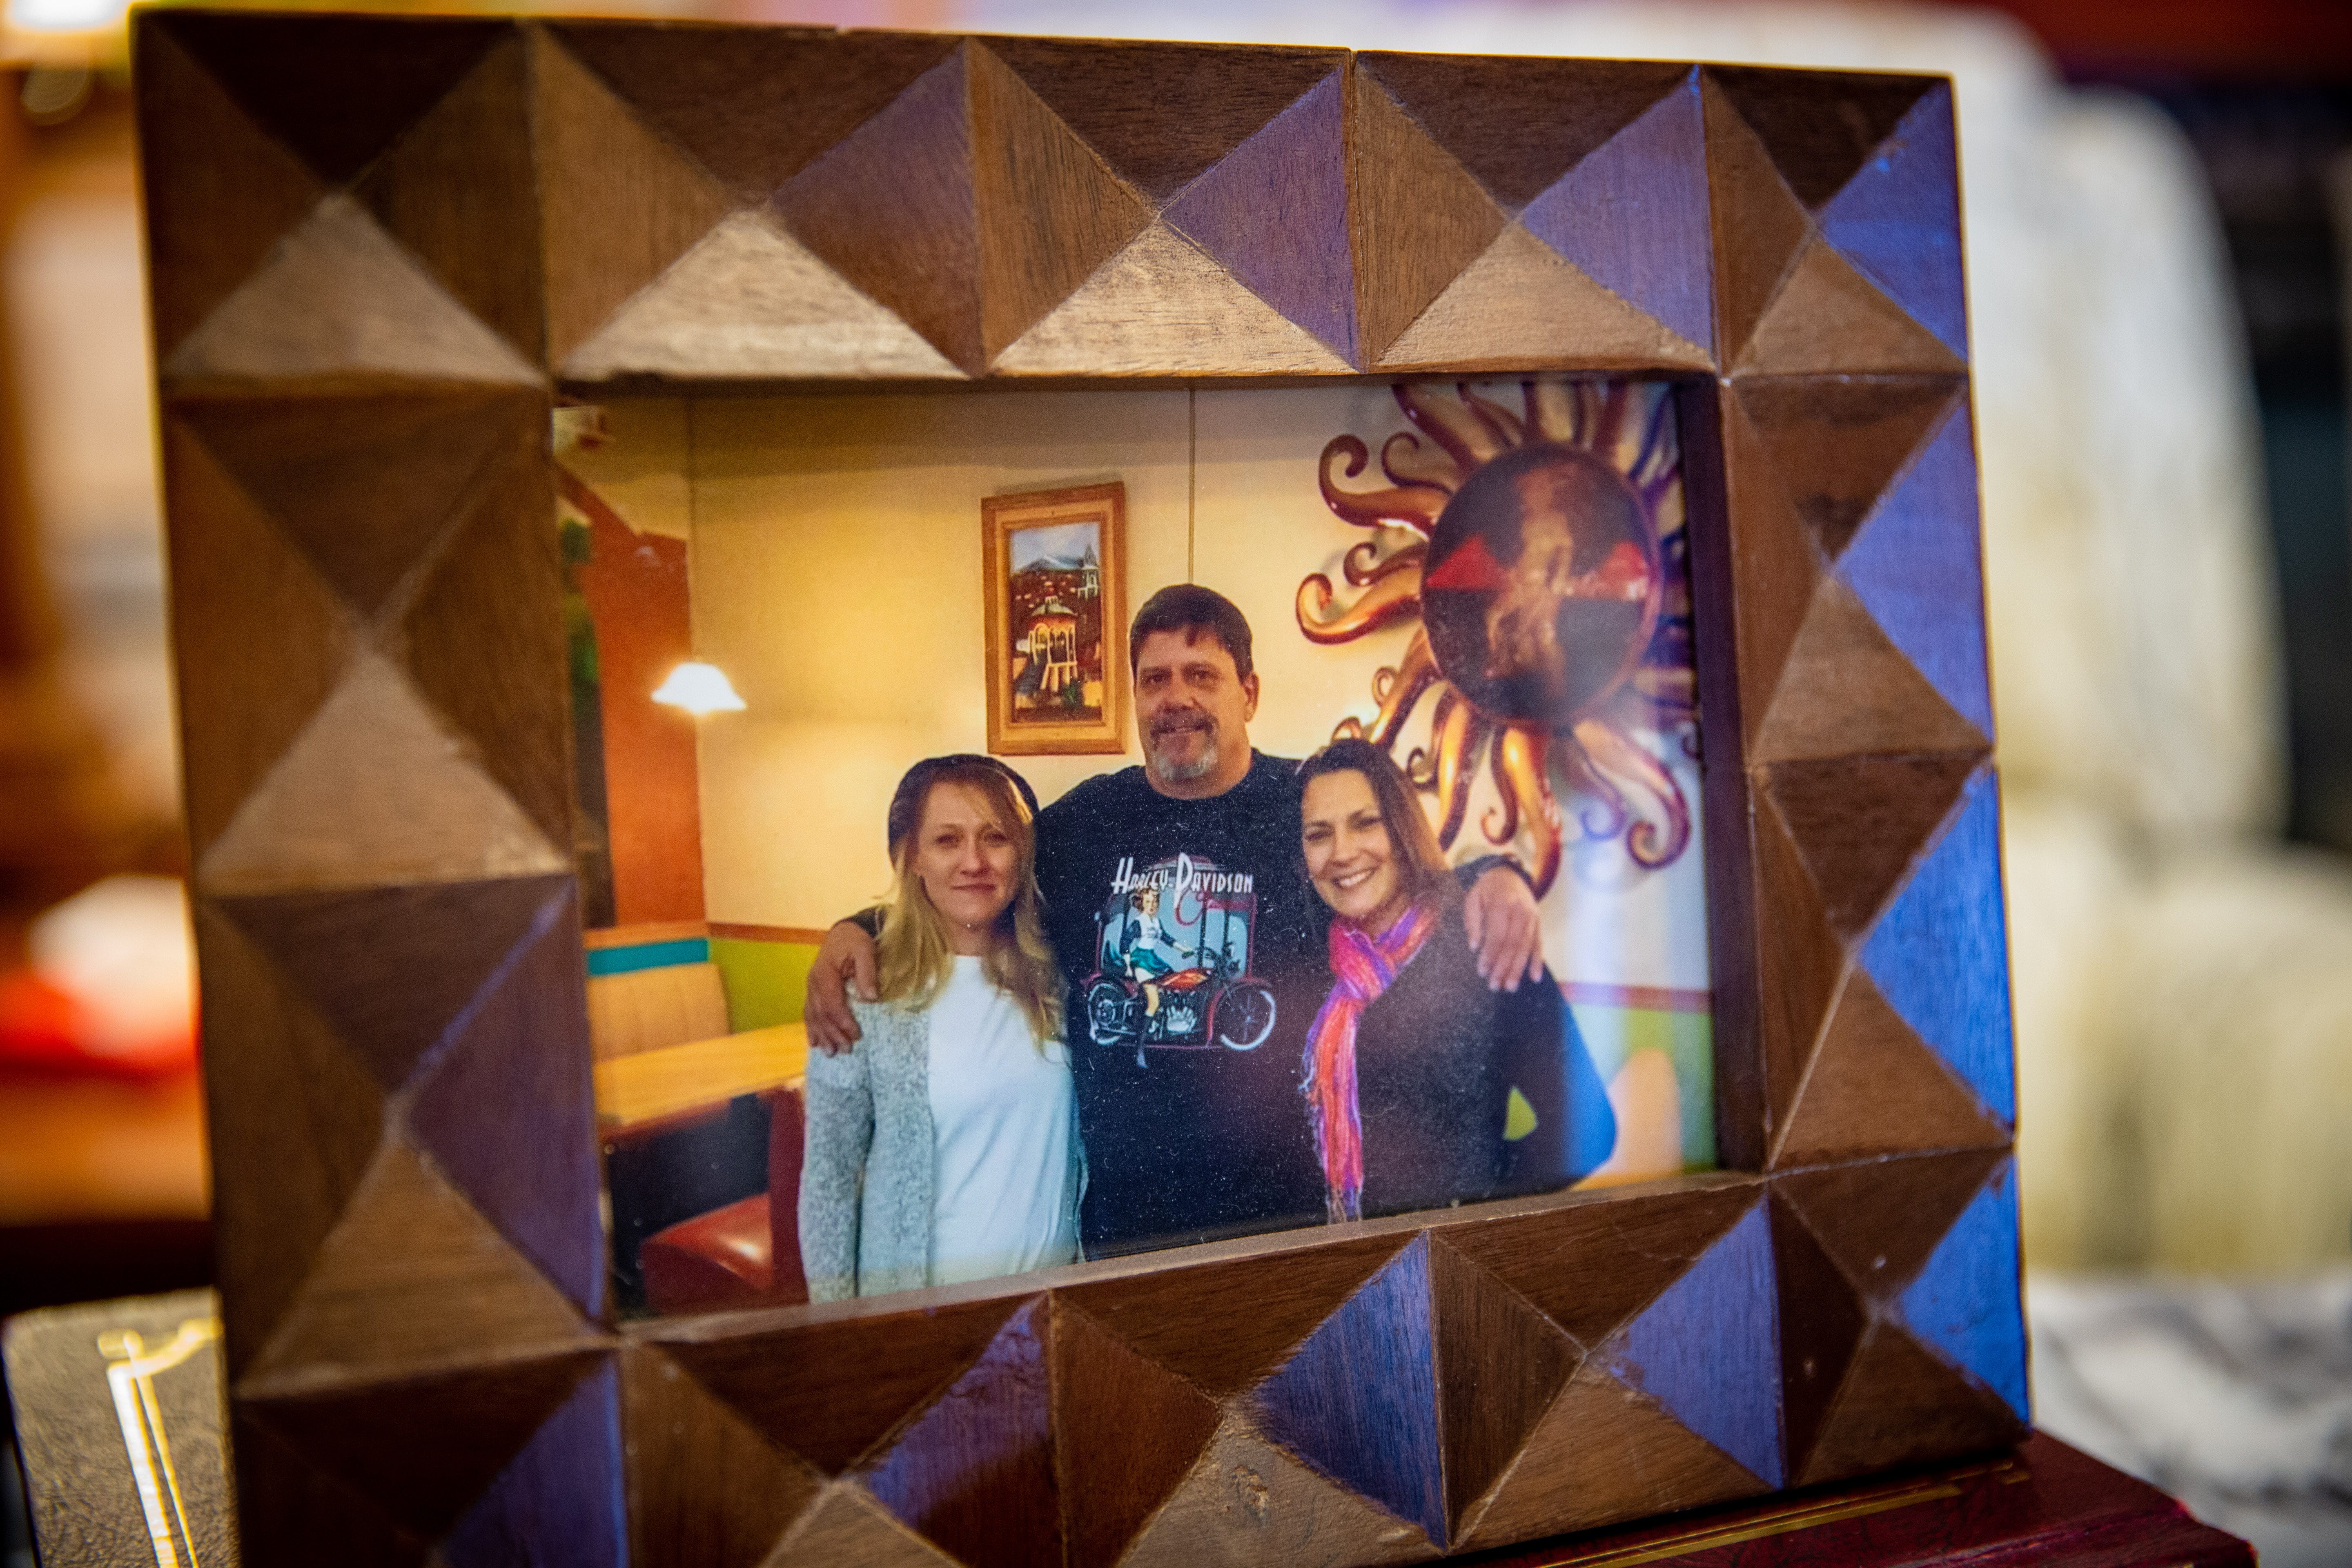 This photo of Rodney Eurom with his daughters Kayleen Simpson and Jennifer Harrison was taken during a meal at his favorite Mexican restaurant.